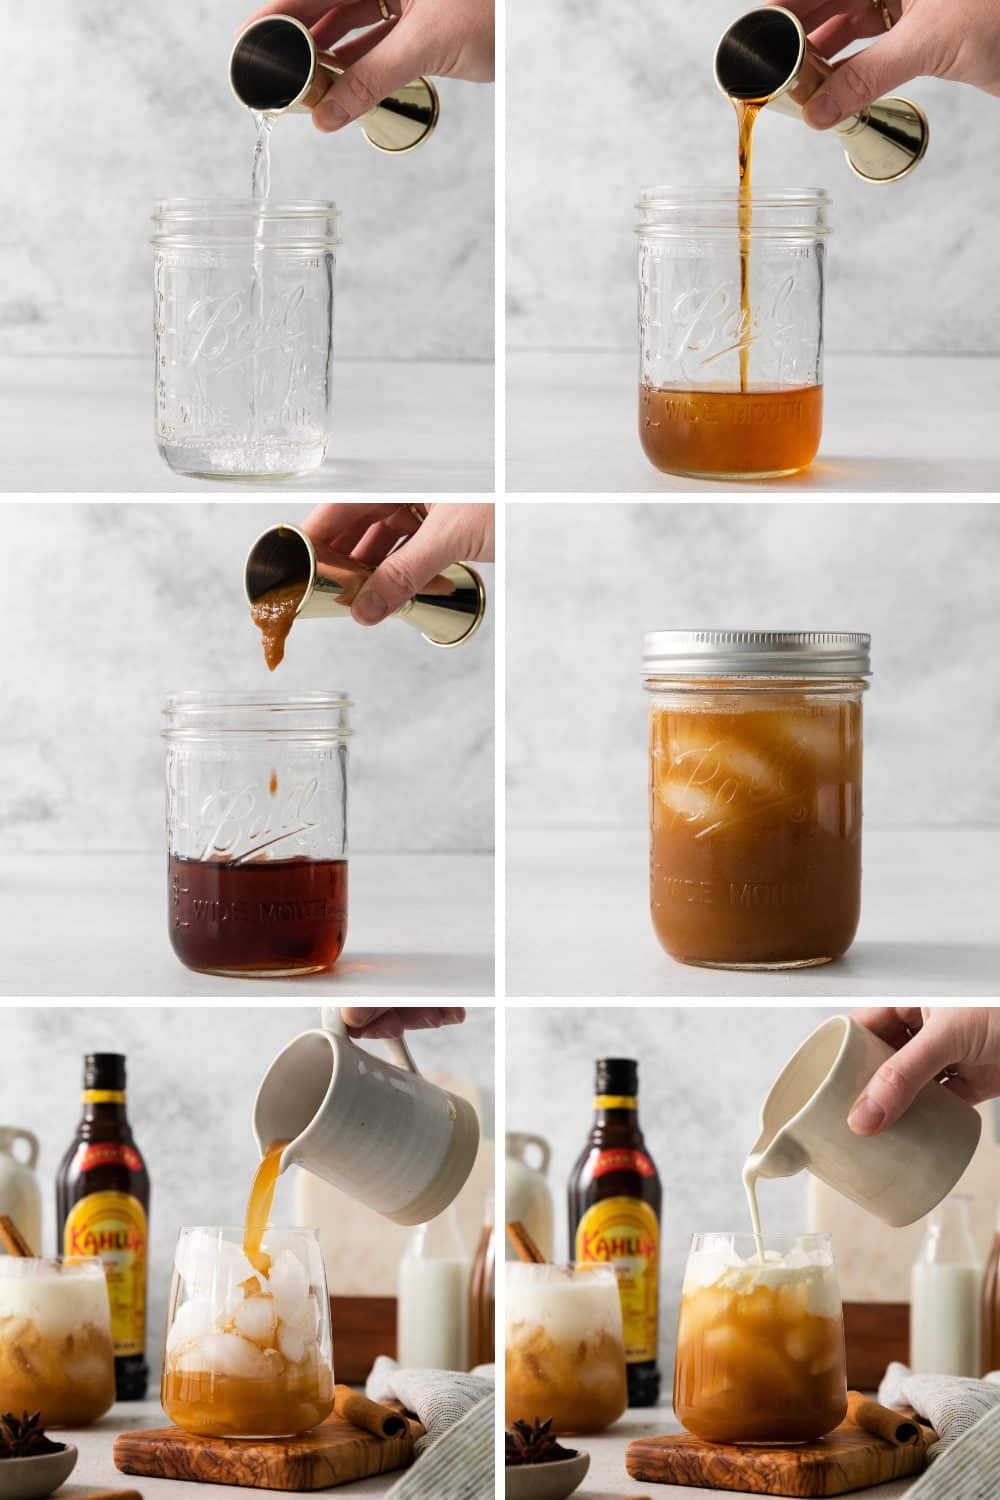 How to Make a Pumpkin Spice White Russian - Process Pictures